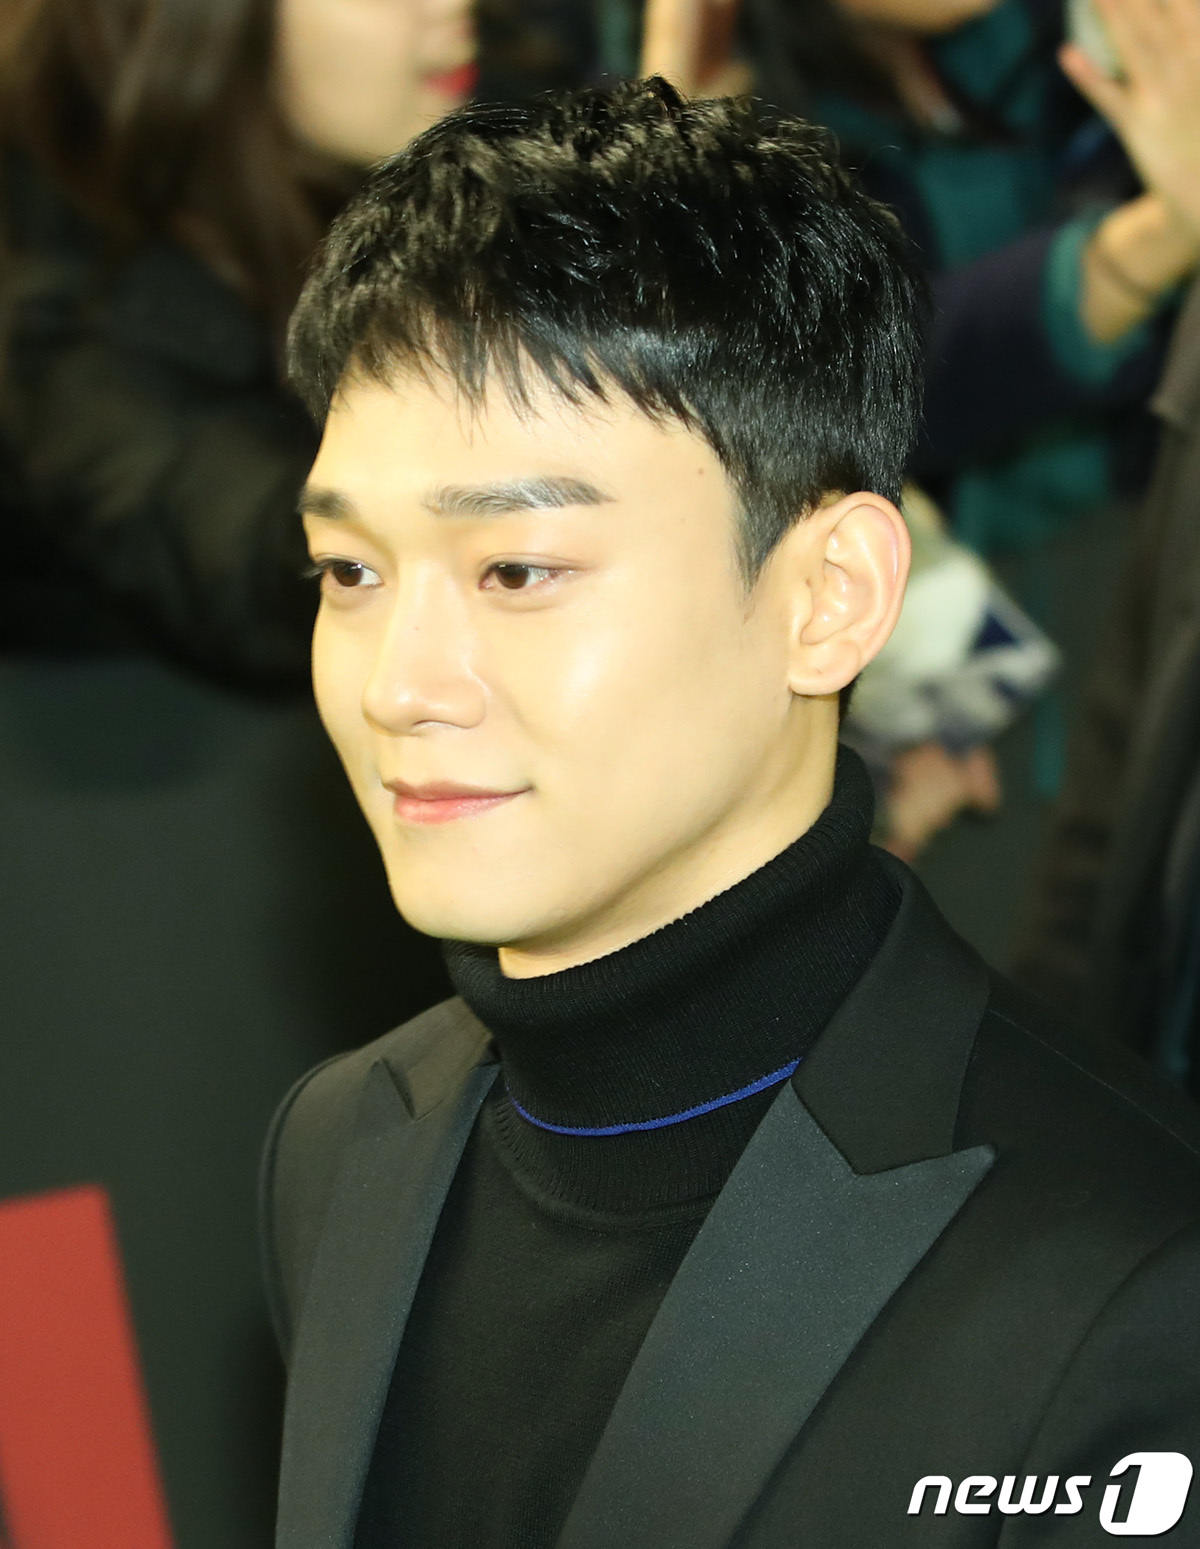 SM Entertainment (hereinafter referred to as SM) announced on the 13th that Chen will marriage with non-entertainer GFriend.SM said, Chen meets a precious relationship and marriages. The bride is a non-entertainer, and marriage ceremony is planned to be held reverently by only the families of both families. Chen was also the first to inform fans of this.I have a GFriend who wants to spend my life together, Chen said, posting a handwritten letter to the official fan club community. I was worried and worried about what would happen due to these resolutions, but I wanted to communicate a little early so that the members and the company, especially the fans who are proud of me, I told him.In the meantime, blessings came to me, he said. I was very embarrassed because I could not do the parts I planned to discuss with the company and members, but I was more encouraged by this blessing.The fans who heard the news responded that they were sudden and amazing but are cheering that it is good to see the courage to tell the fans first.SM officials responded that they were cautious about the details of Chens marriage period and devotion period, and said, There is no change in EXOs schedule and I would like to ask for your support in the future.Chen debuted as EXO in 2012 and has grown into a global idol in the top ranking in Korea.